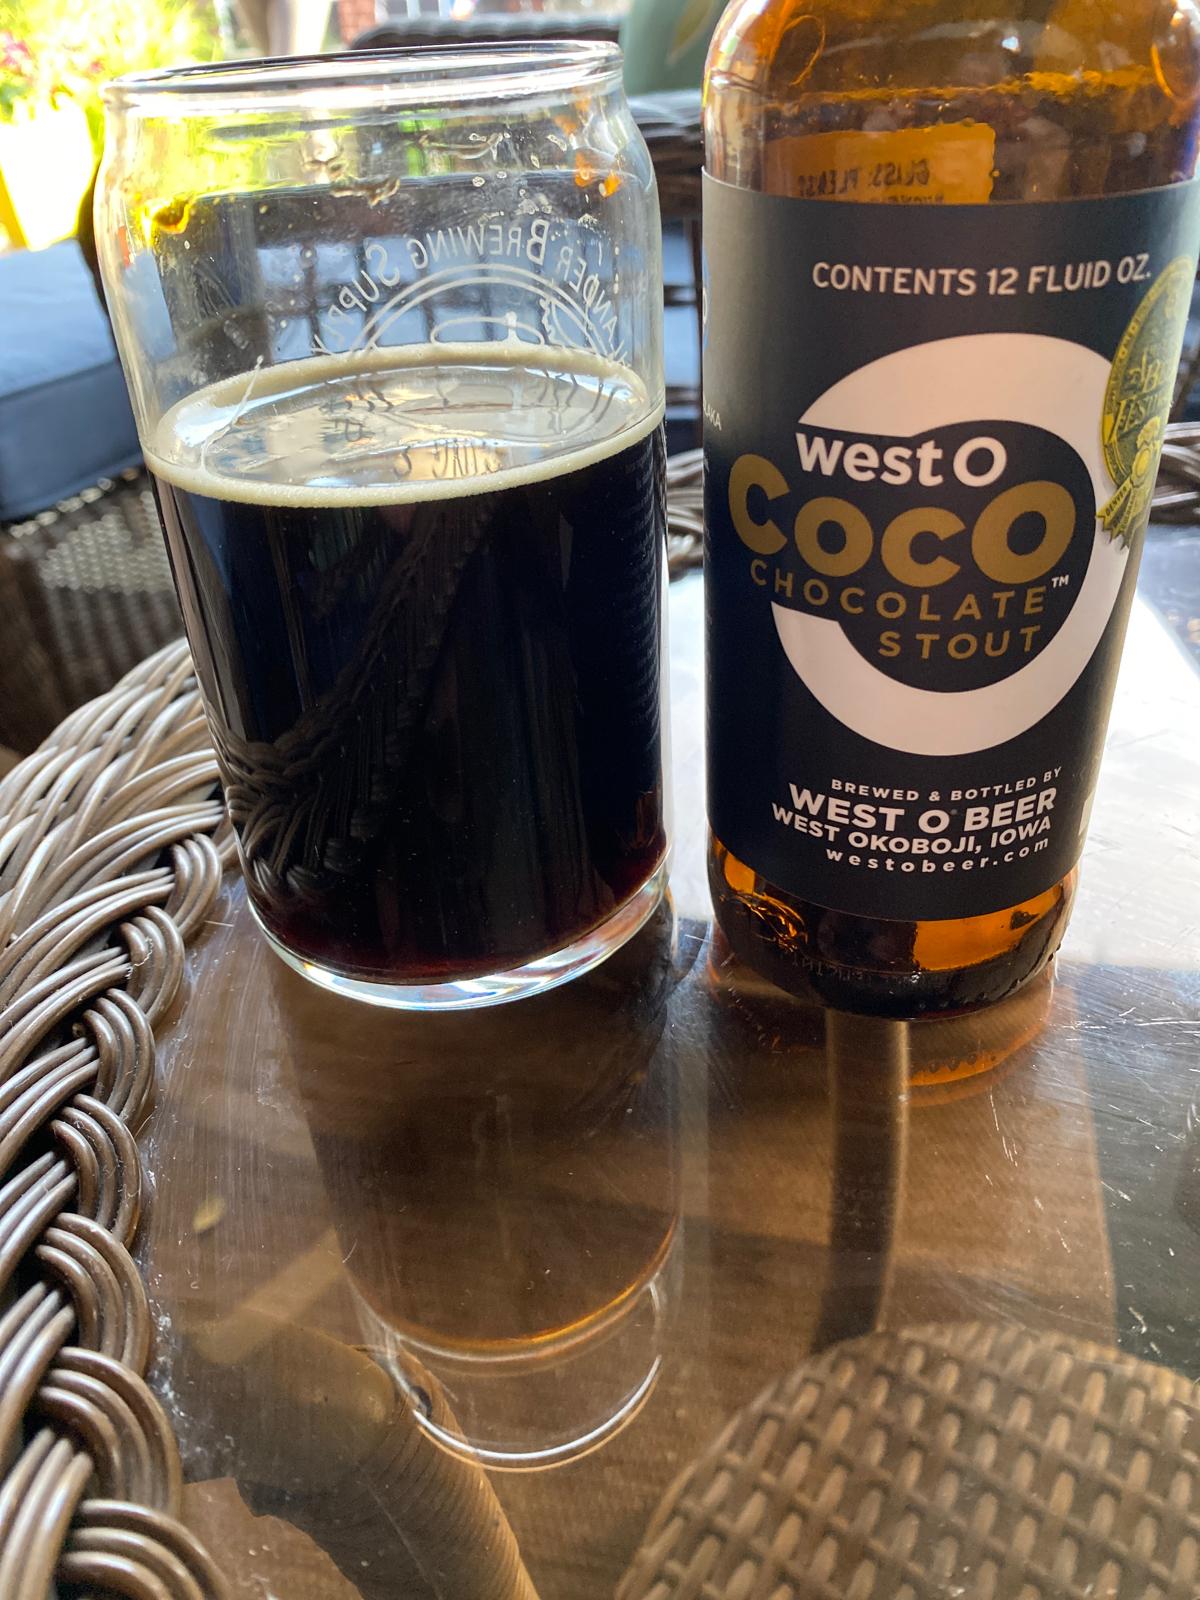 CoCo Chocolate Stout